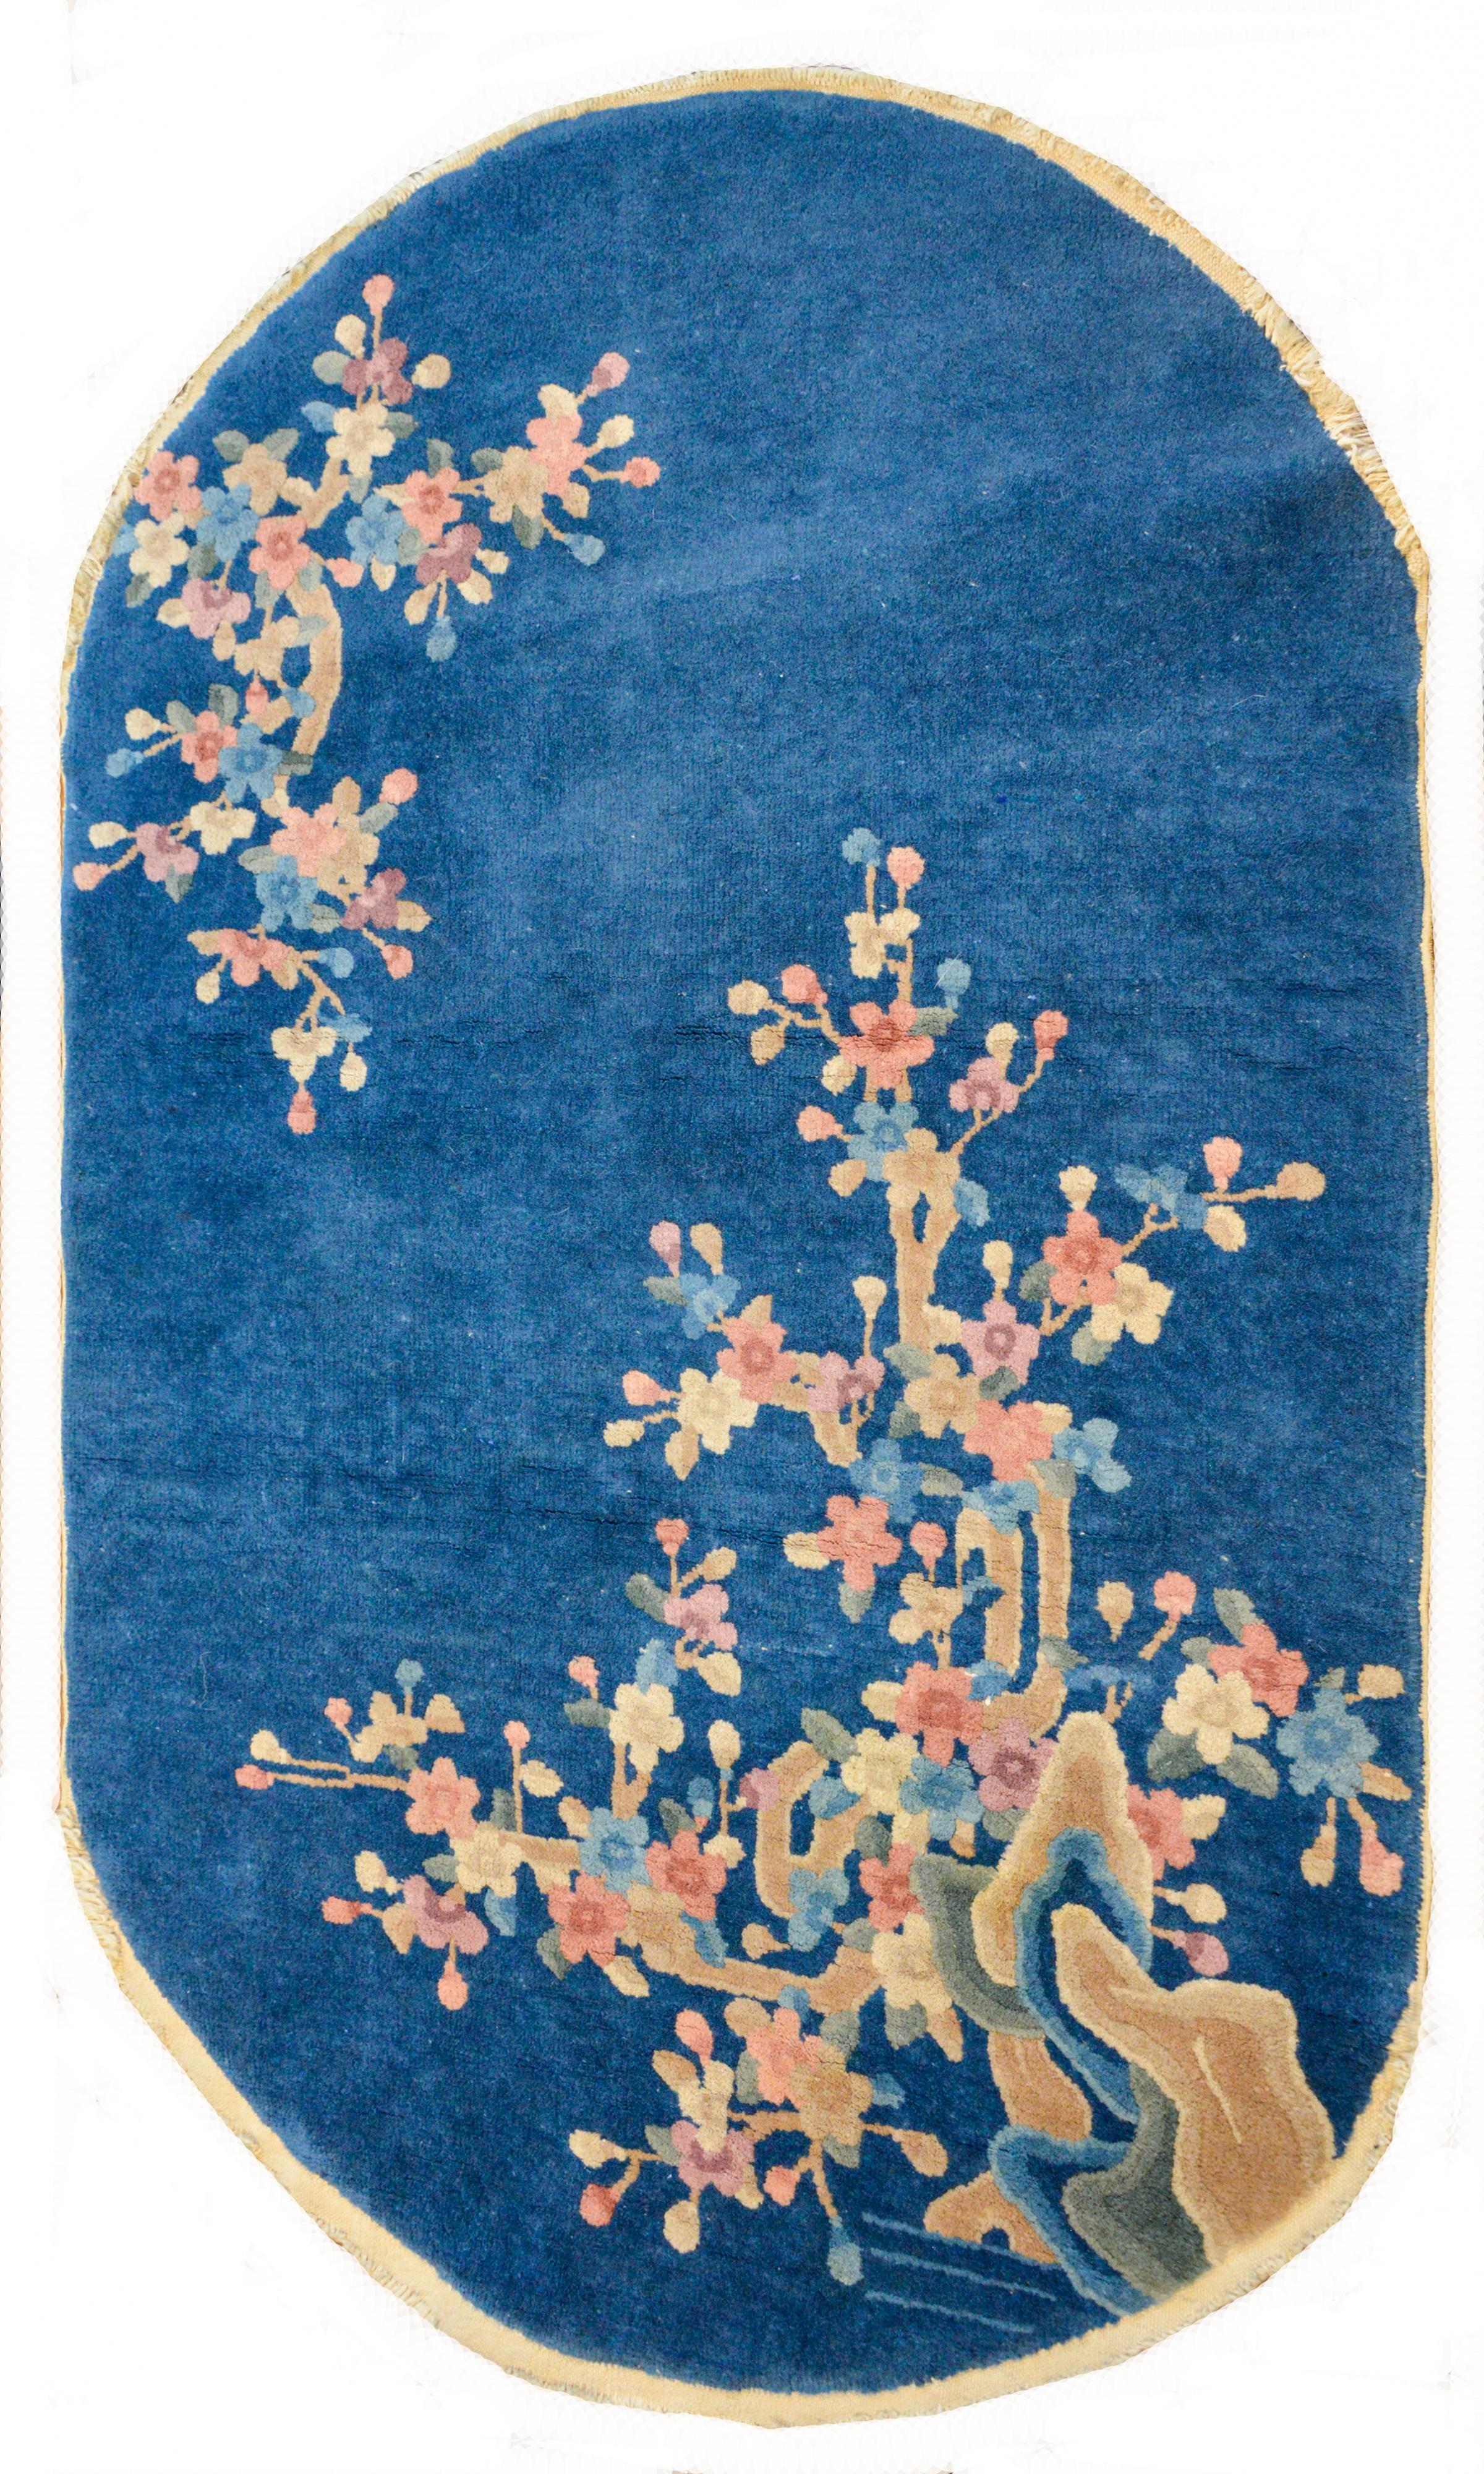 A pair of early 20th century Chinese Art Deco oval rugs, each with a flowering cherry blossom tree growing from within a scholar's rock in each corner, and set against a light indigo background.